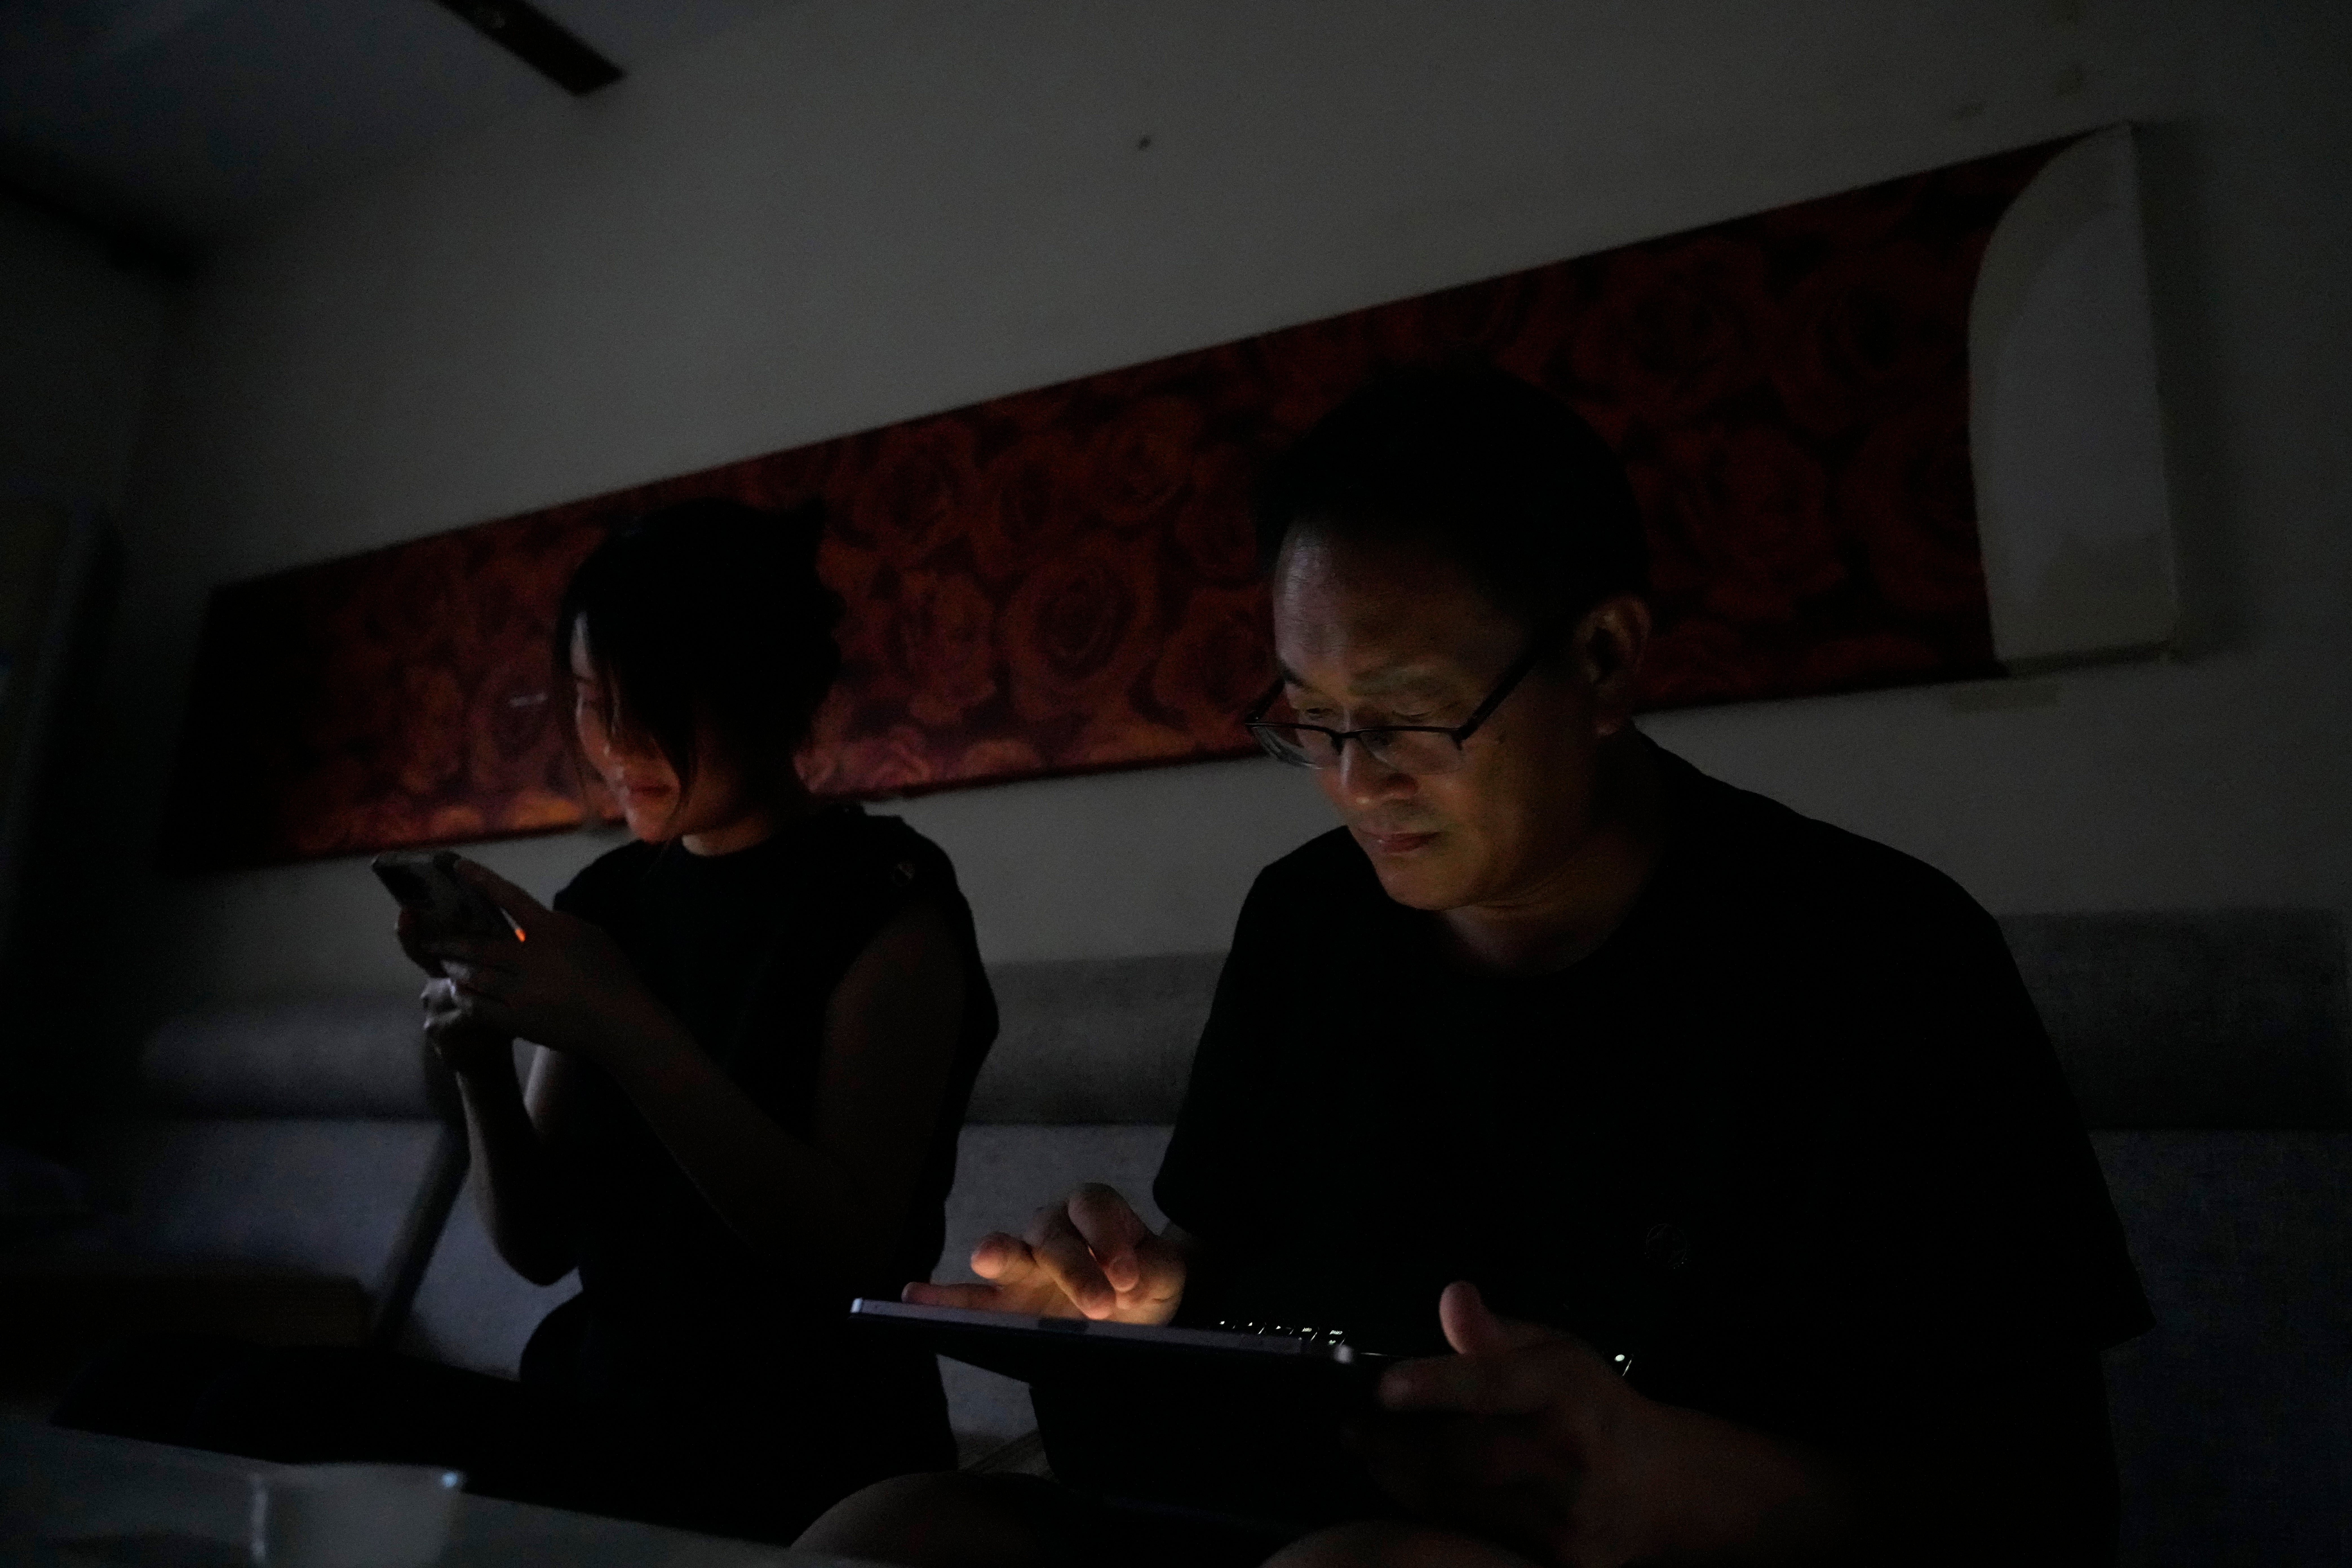 Wang Quanzhang and his wife Li Wenzu look at their phone and laptop in the dark after power was cut off for their apartment in Beijing's Changping district